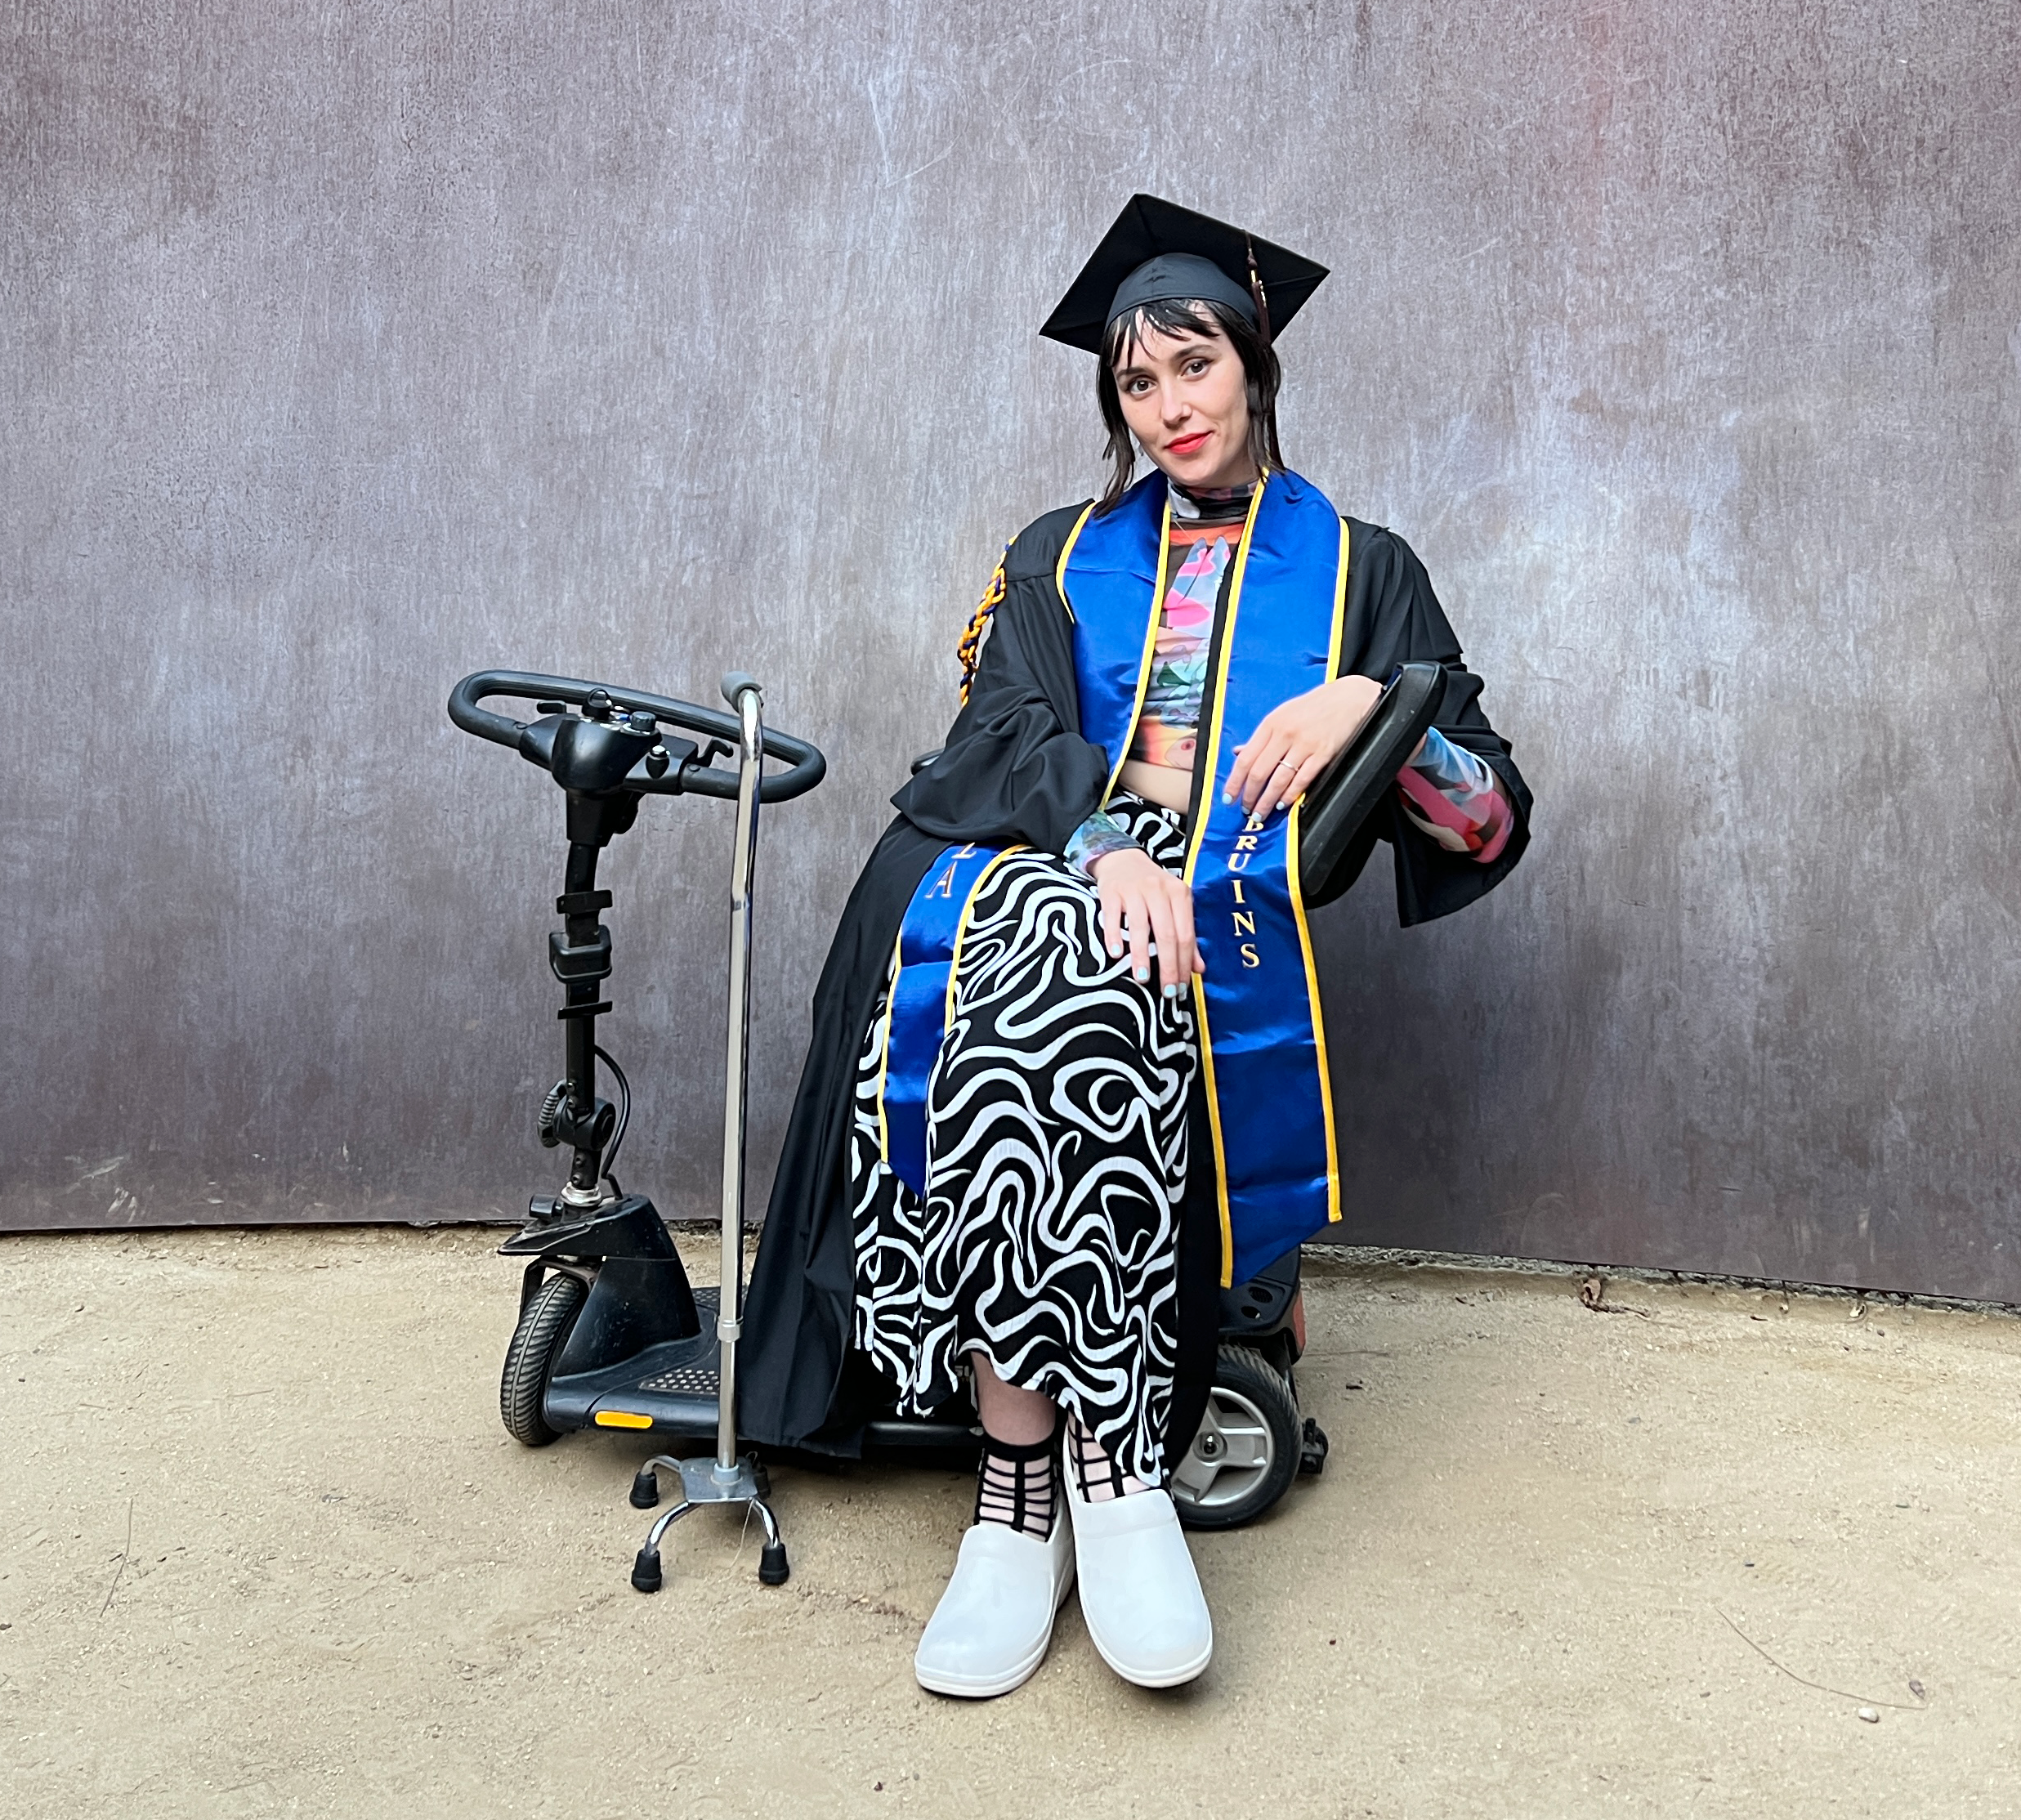 Natalee is a white person with straight dark brown hair wearing a black cap and gown and blue and gold UCLA sash, a colorful patterned long sleeve mesh top and a black and white swirl patterned skirt. They are seated on a black mobility scooter next to a silver quad cane outside in front of a rusted metal Richard Serra sculpture. They have their legs crossed and are smiling.